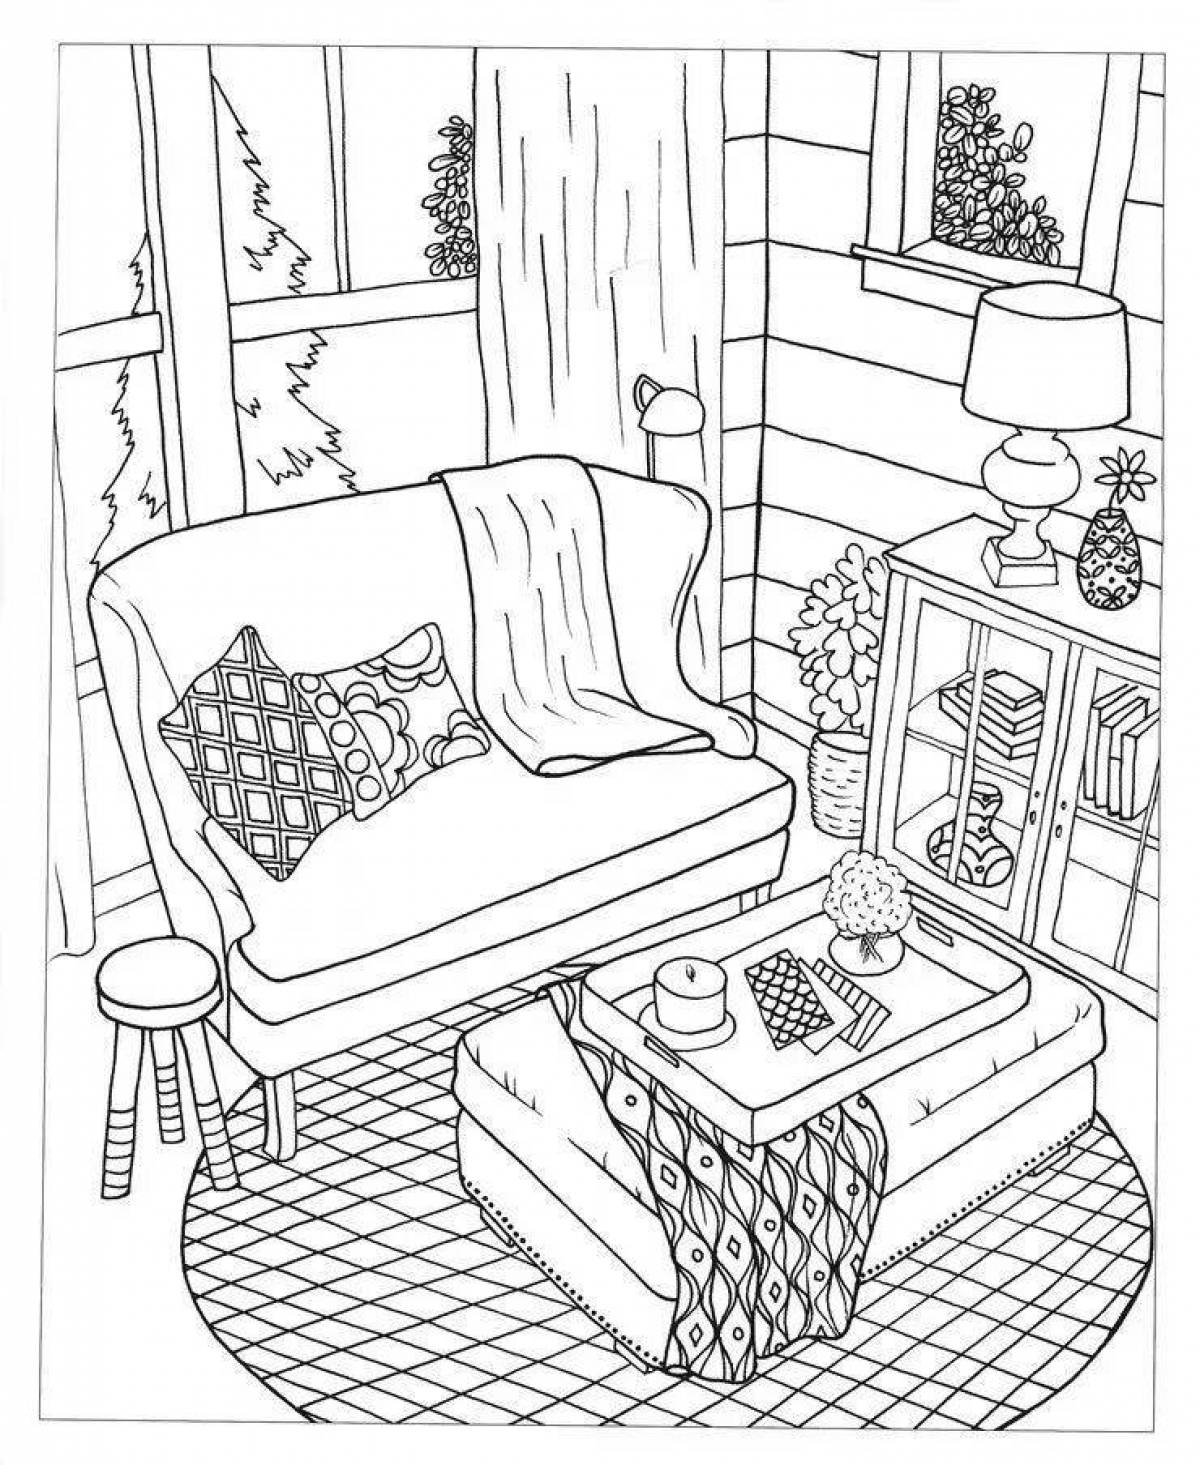 Coloring room of a charming girl